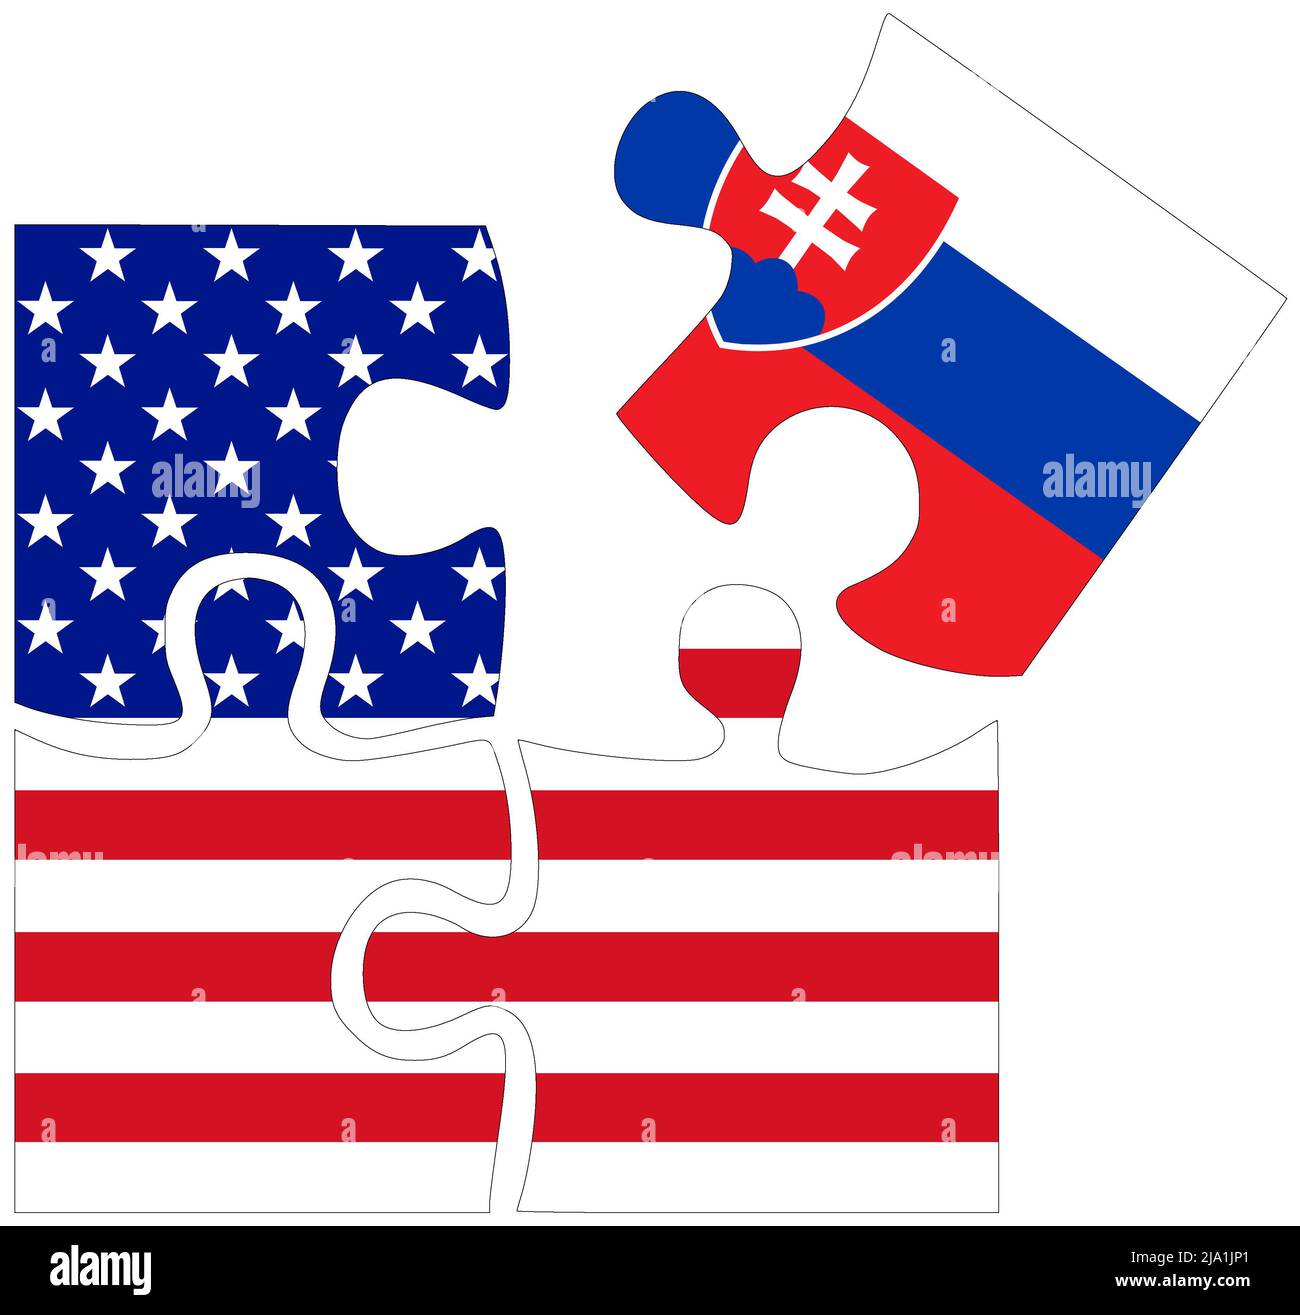 USA - Slovakia : puzzle shapes with flags, symbol of agreement or friendship Stock Photo